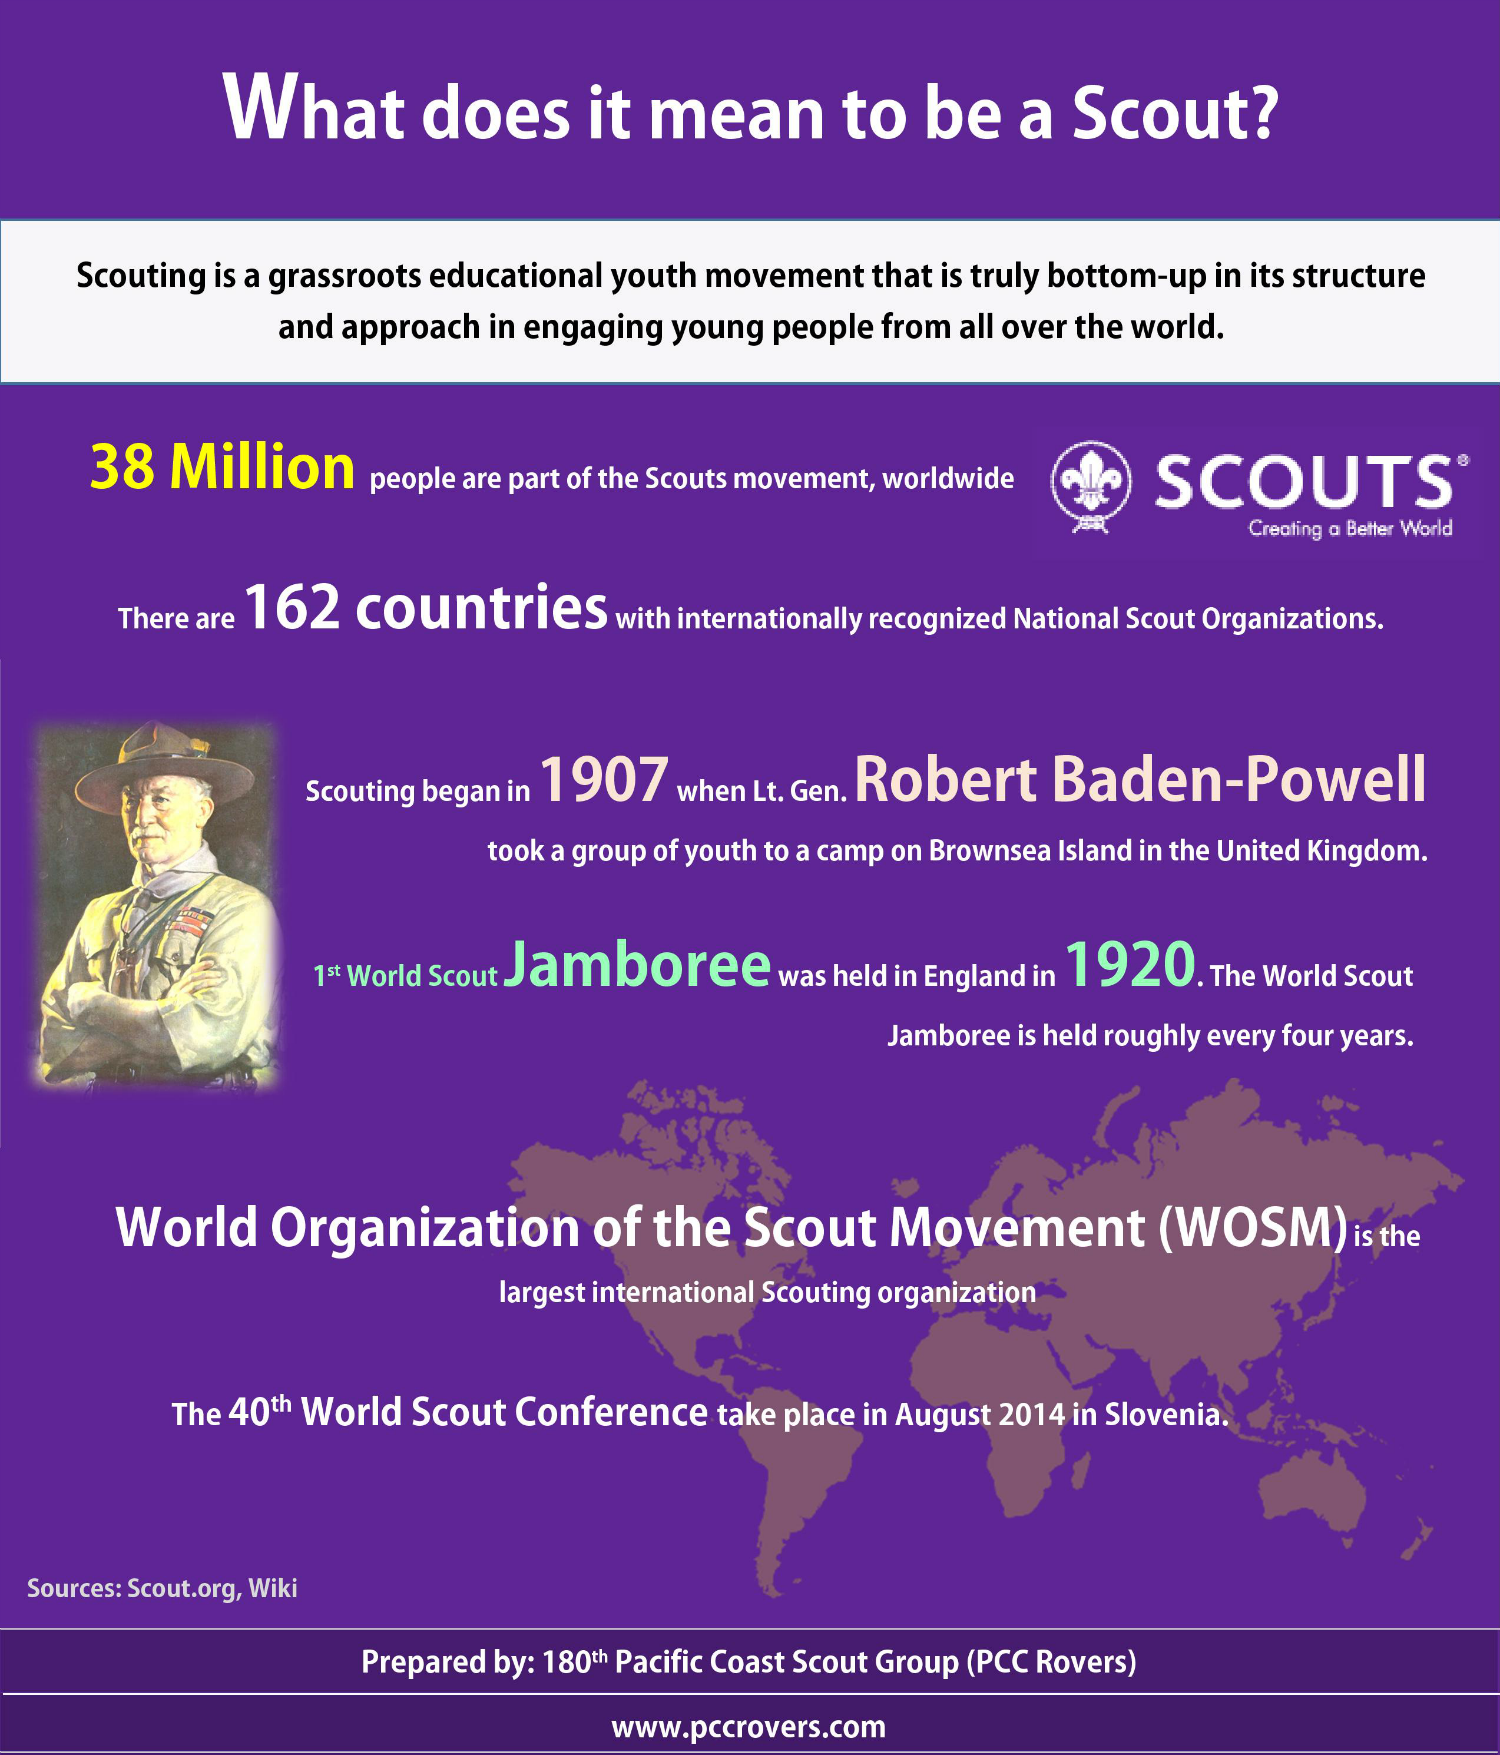 What does it mean to be a Scout?